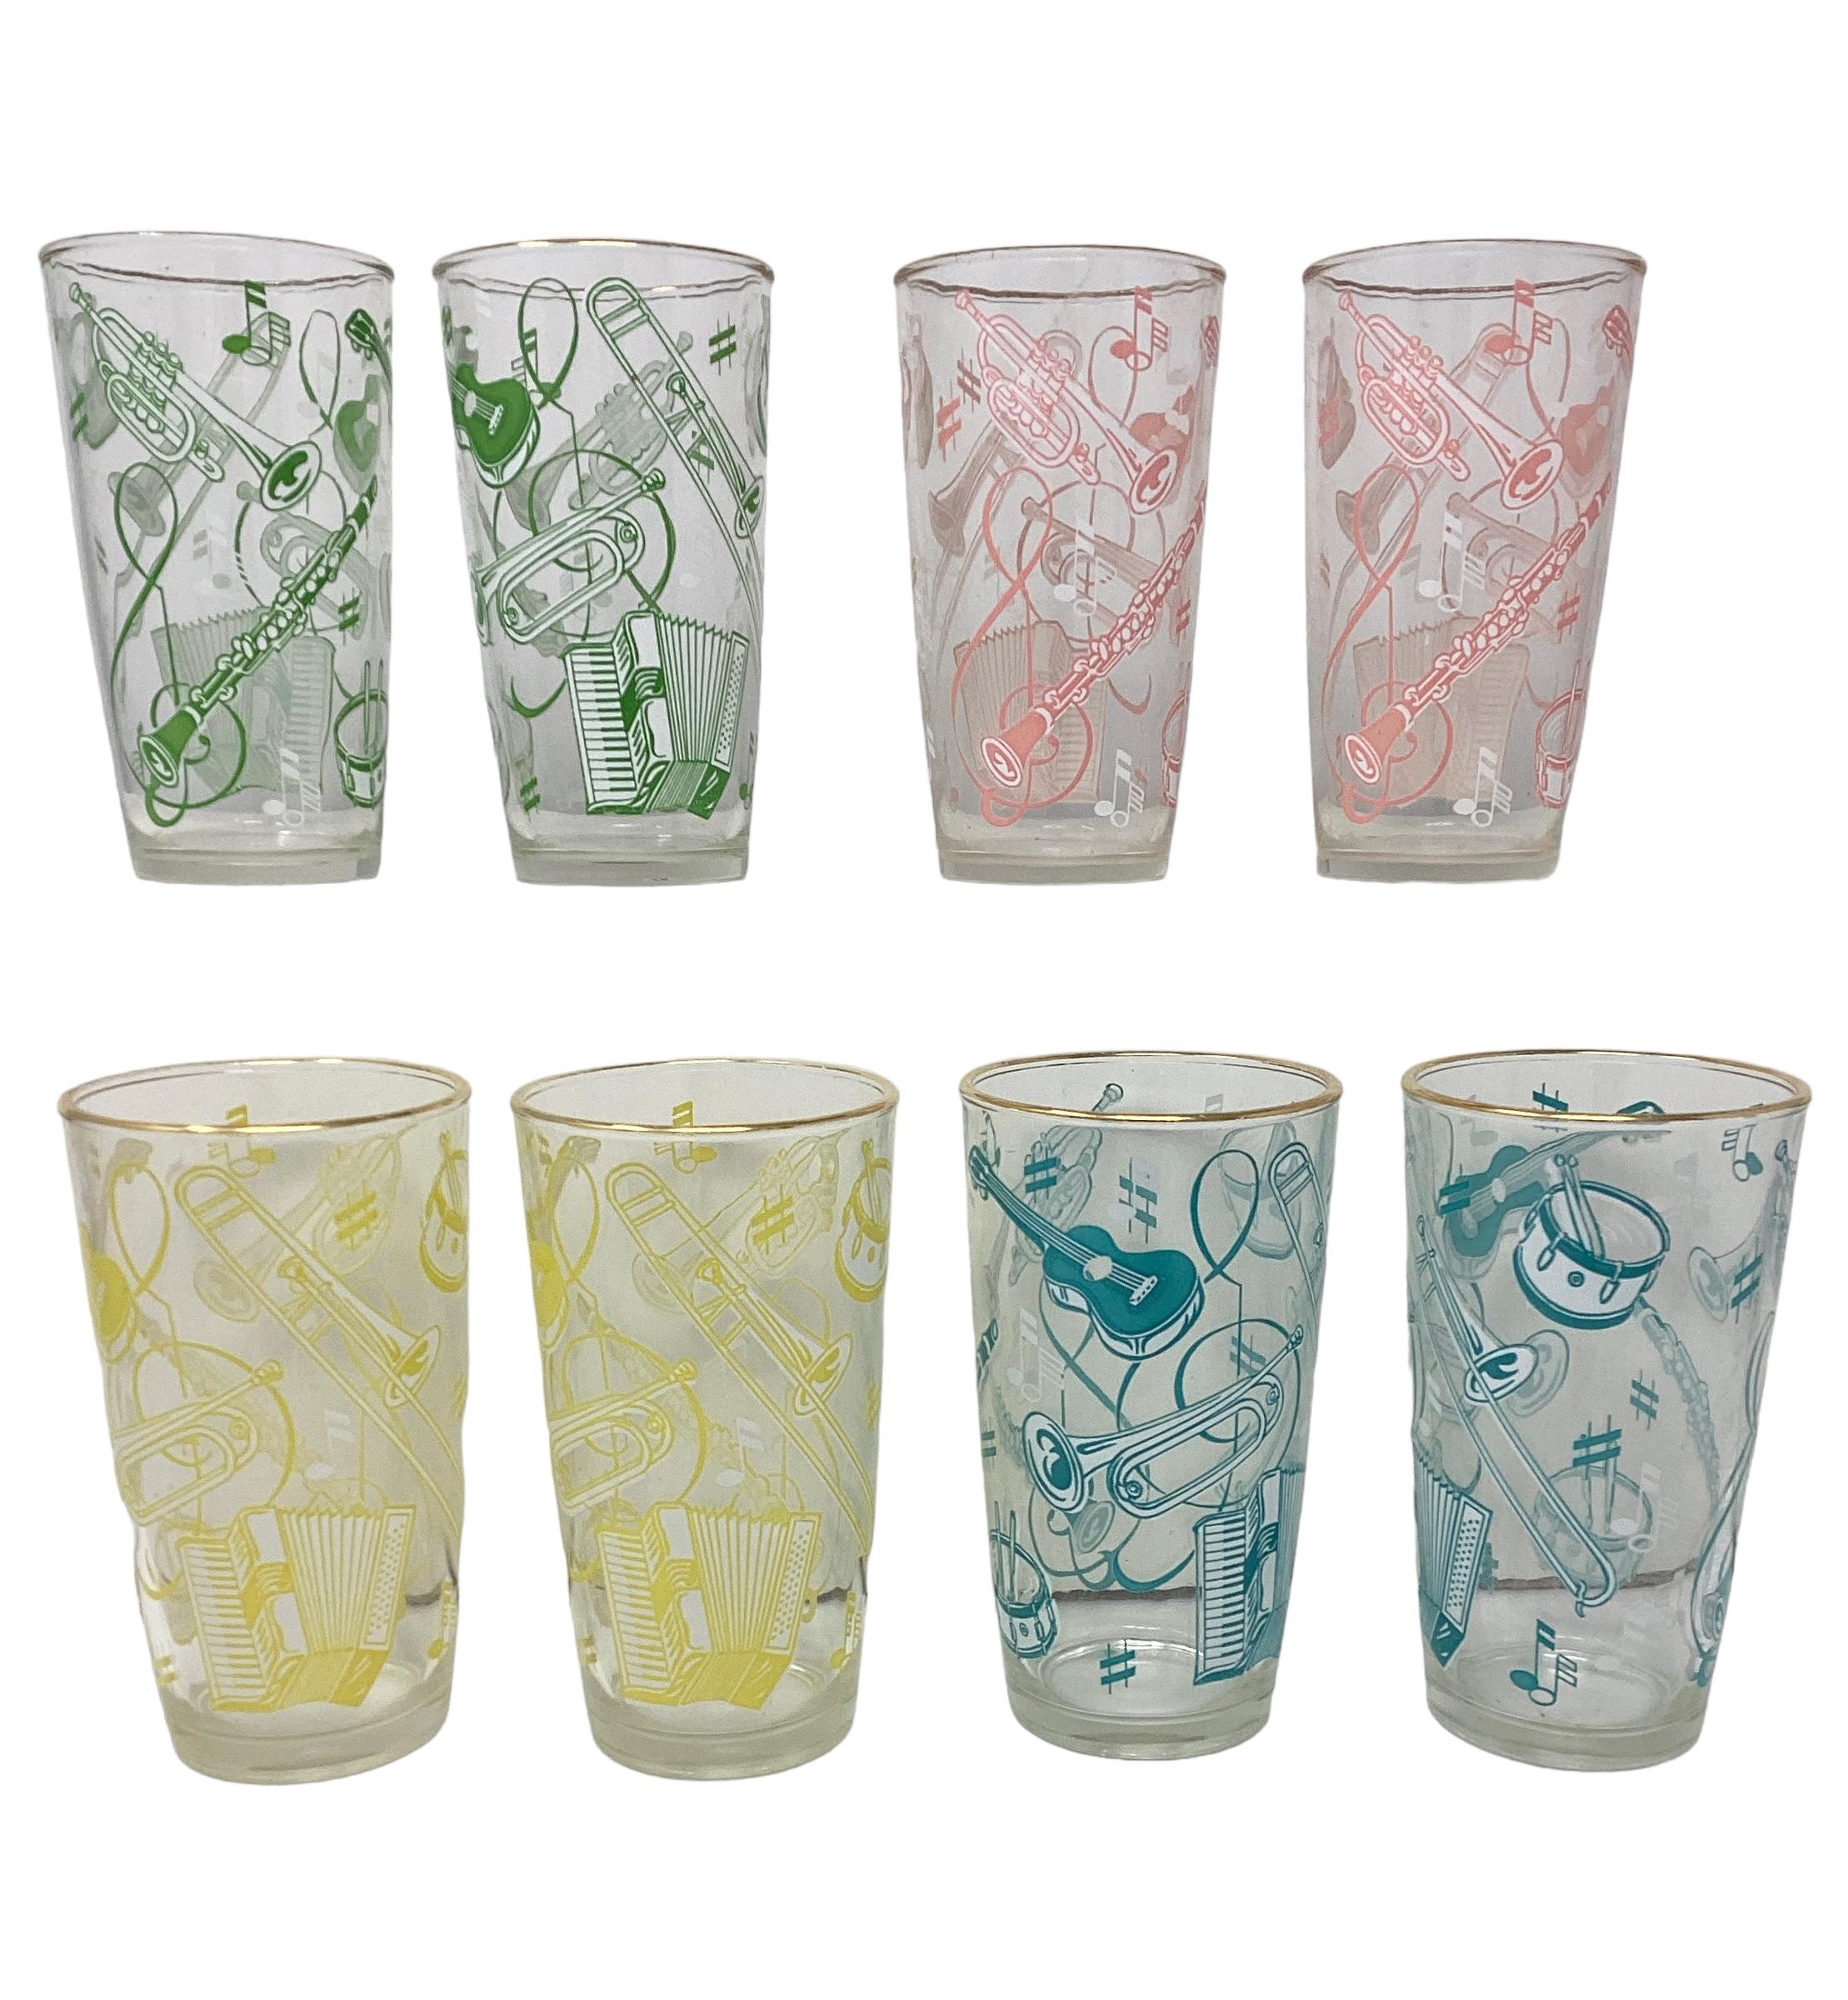 Set of 8 Hazel-Atlas Musical Themed Highball Glasses  In Good Condition For Sale In Chapel Hill, NC